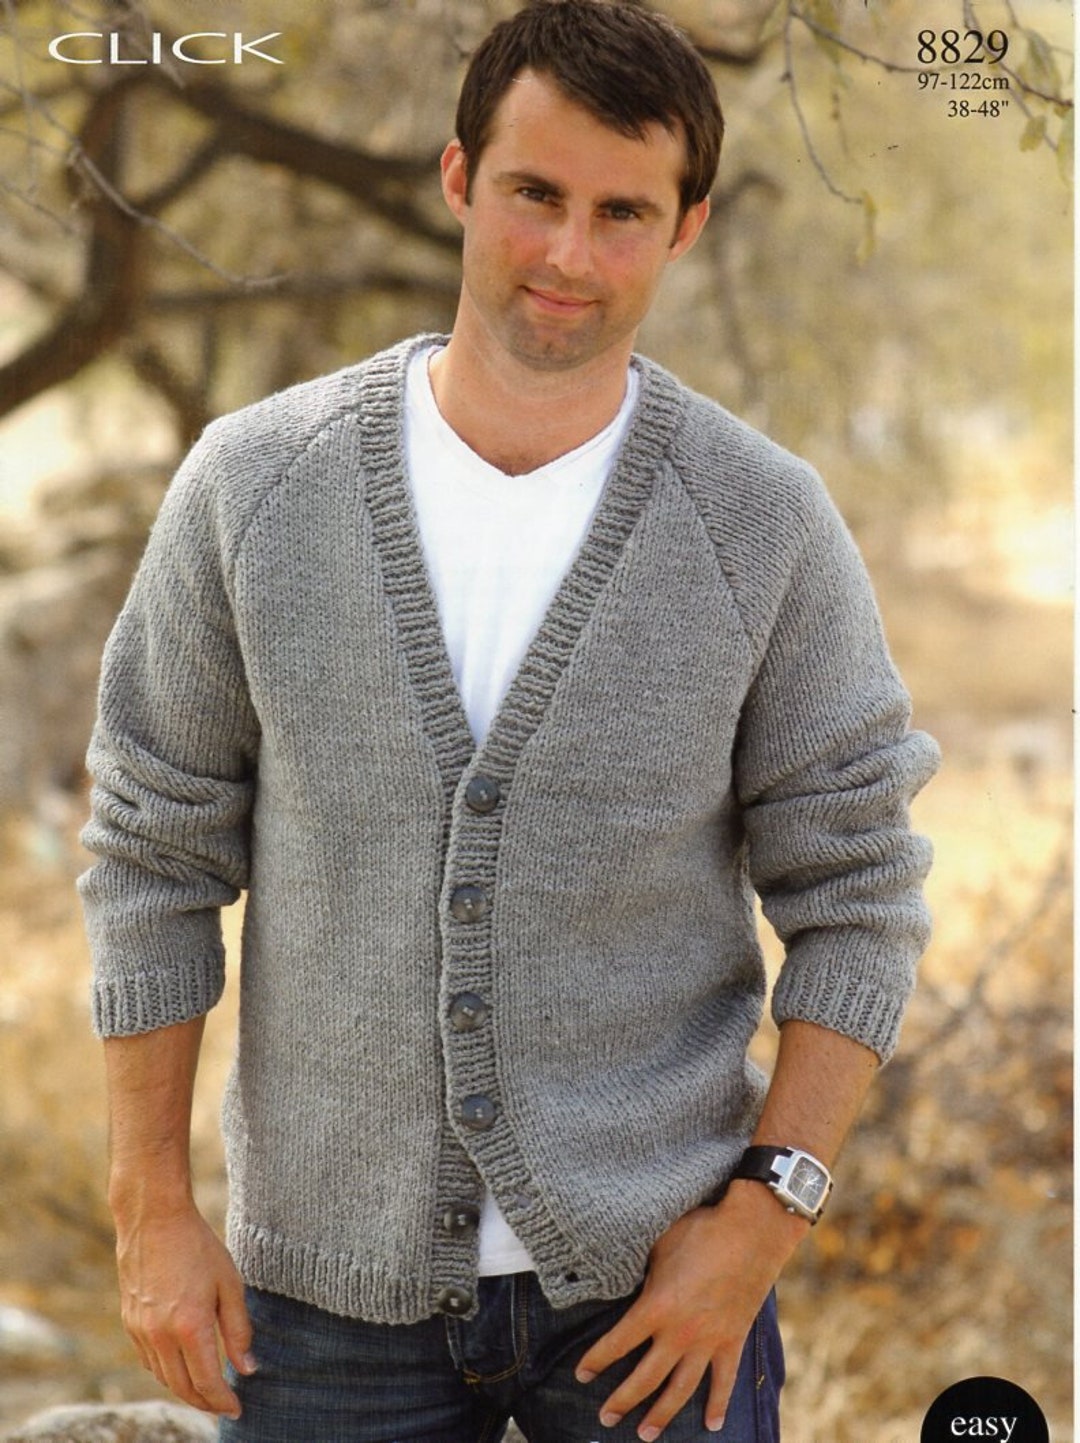 How to Wear a Men’s Cardigan